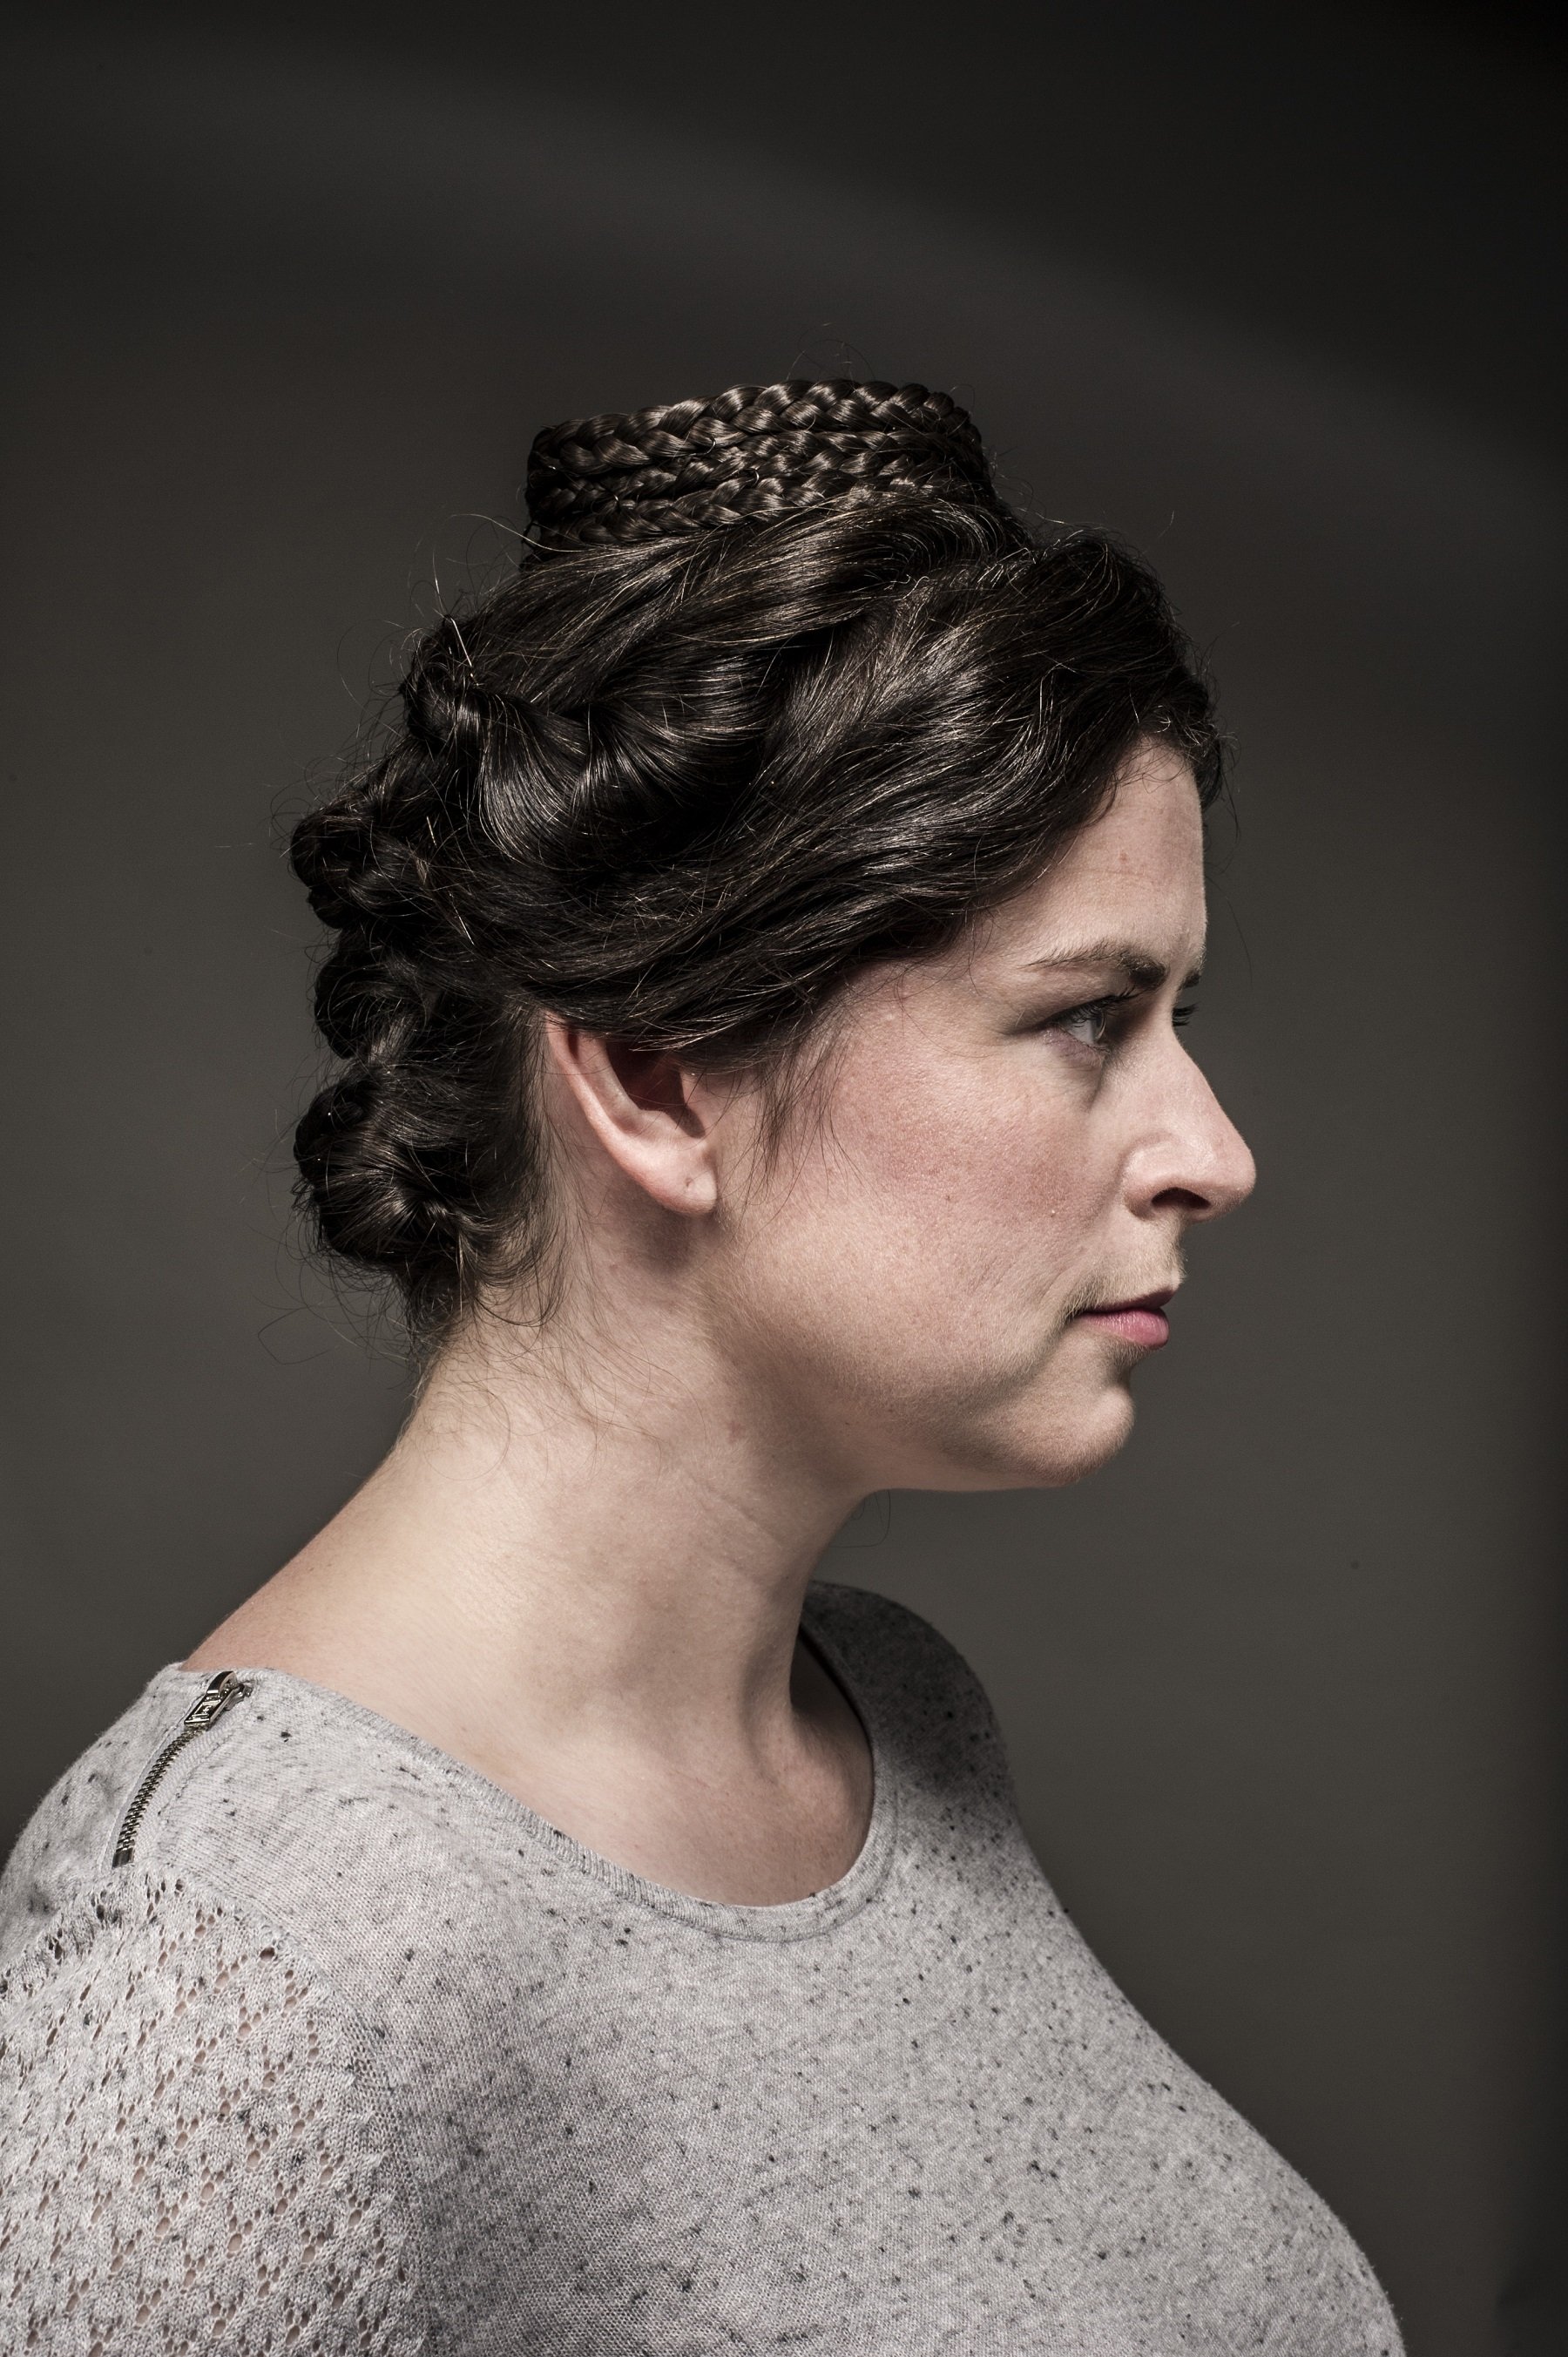 Profile of woman with plaited hairstyle